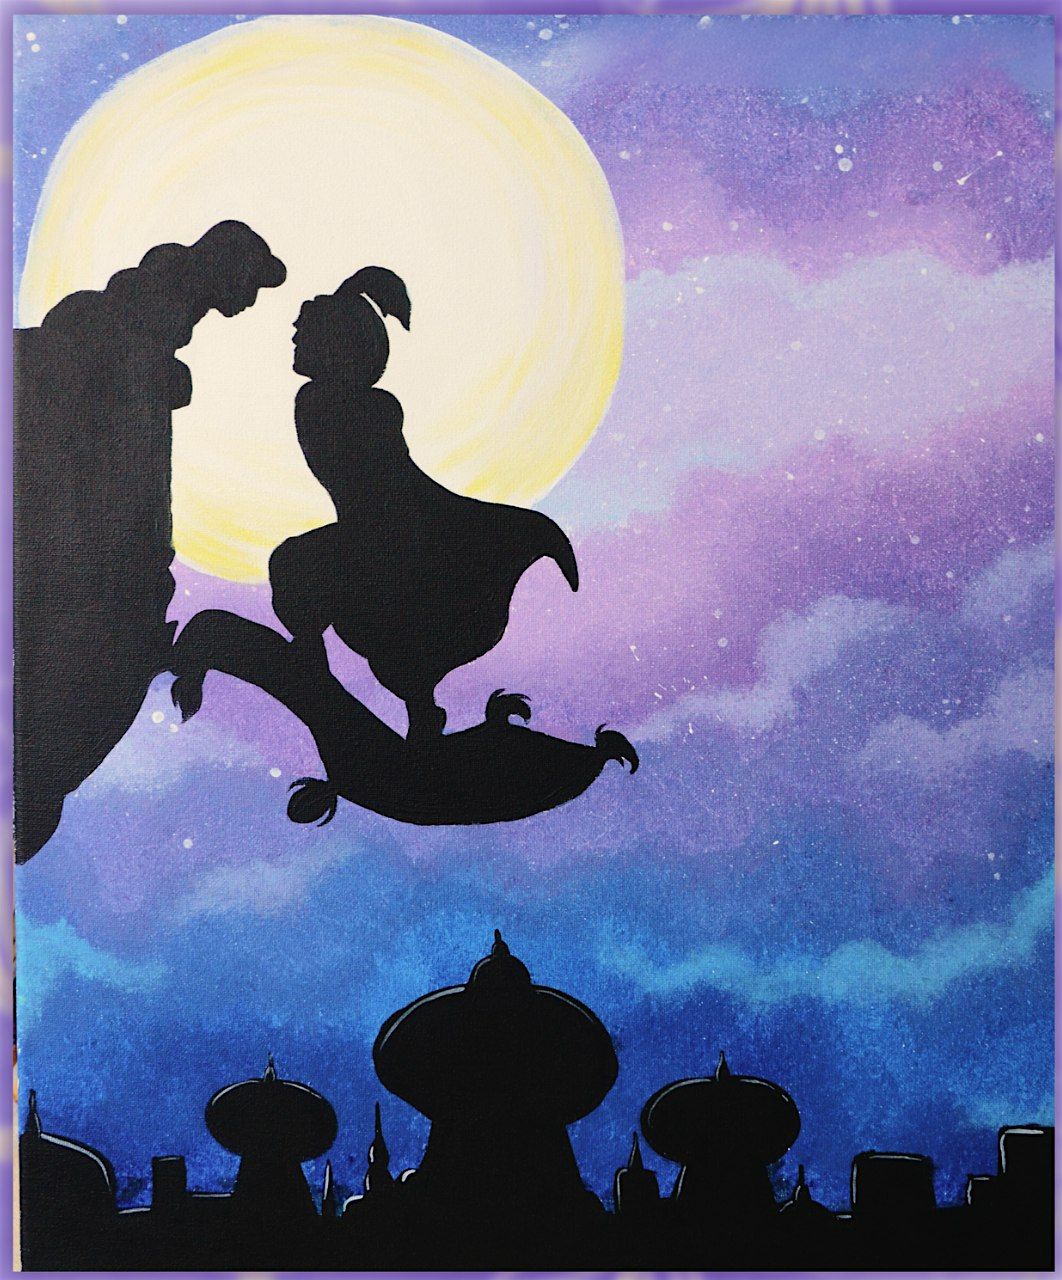 Youth Paint Session - Aladdin